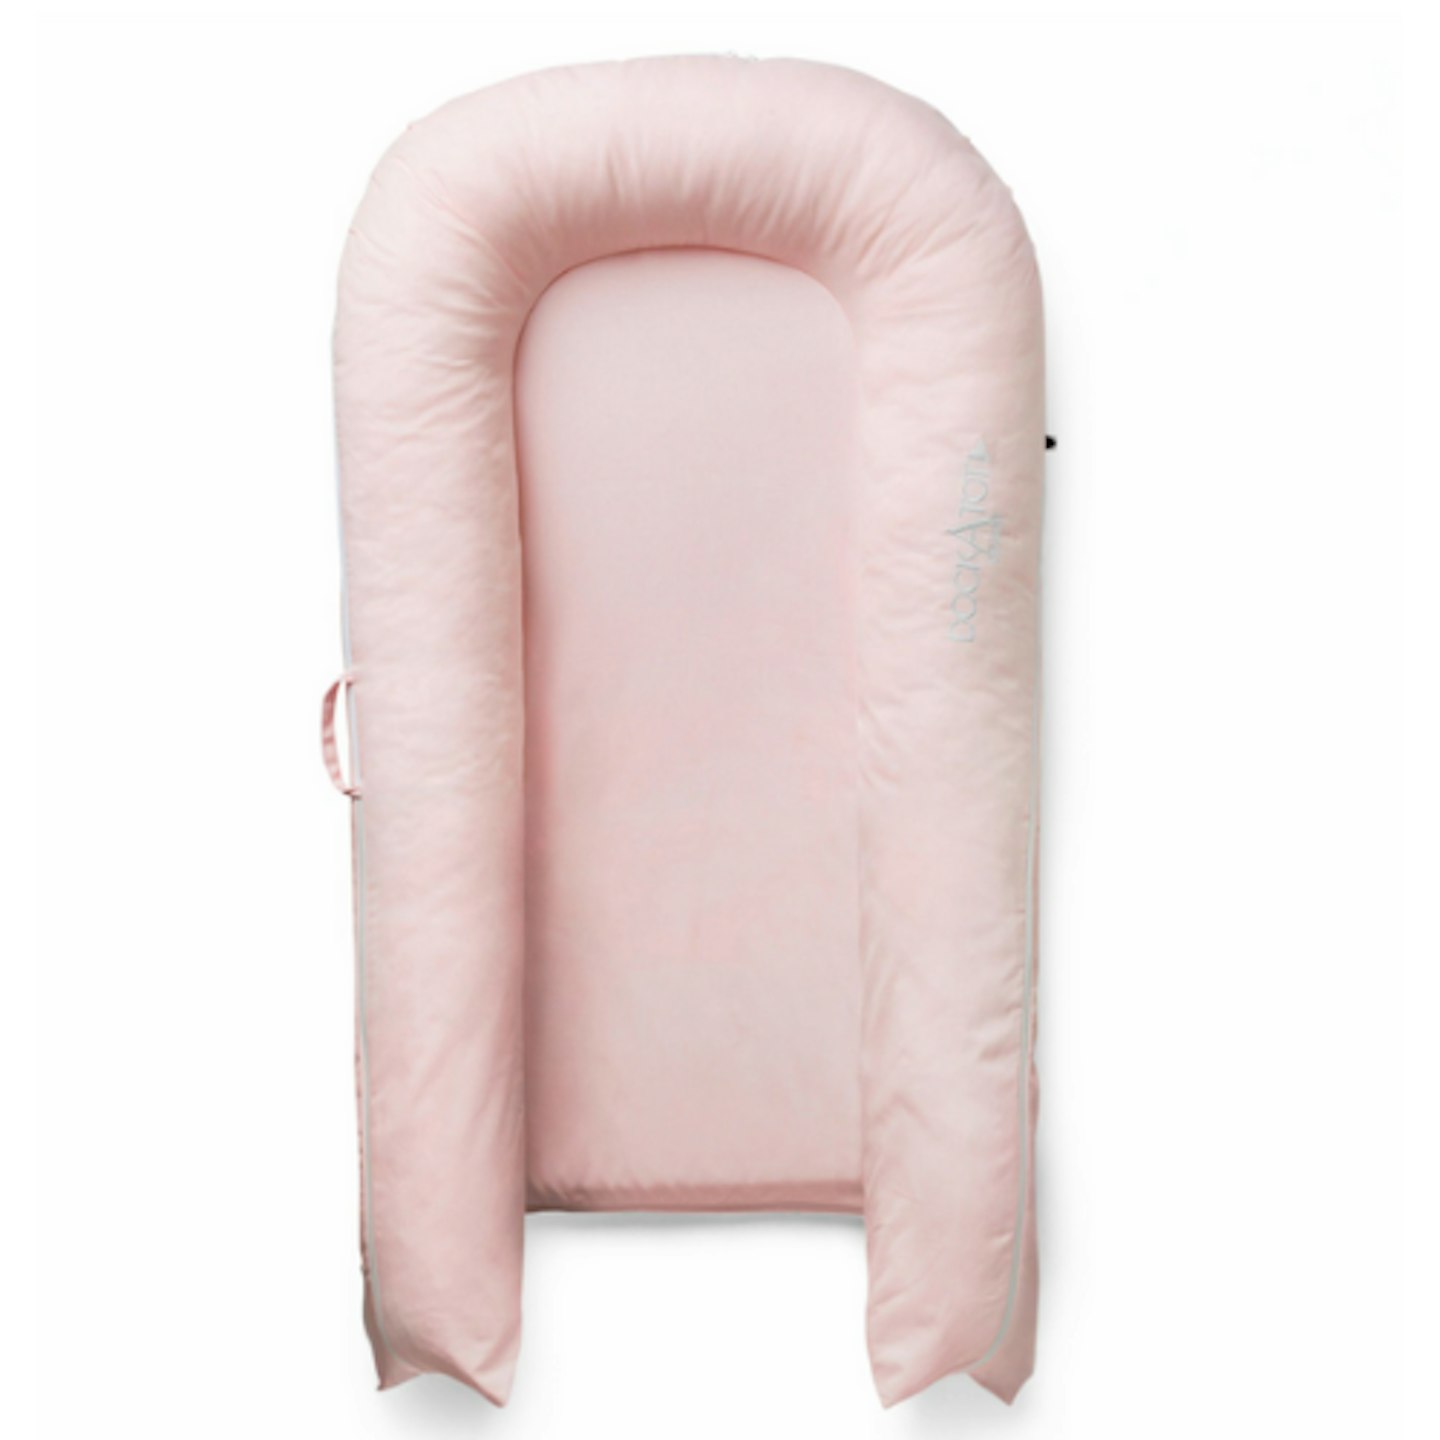 DockATot Grand Spare Cover Pink